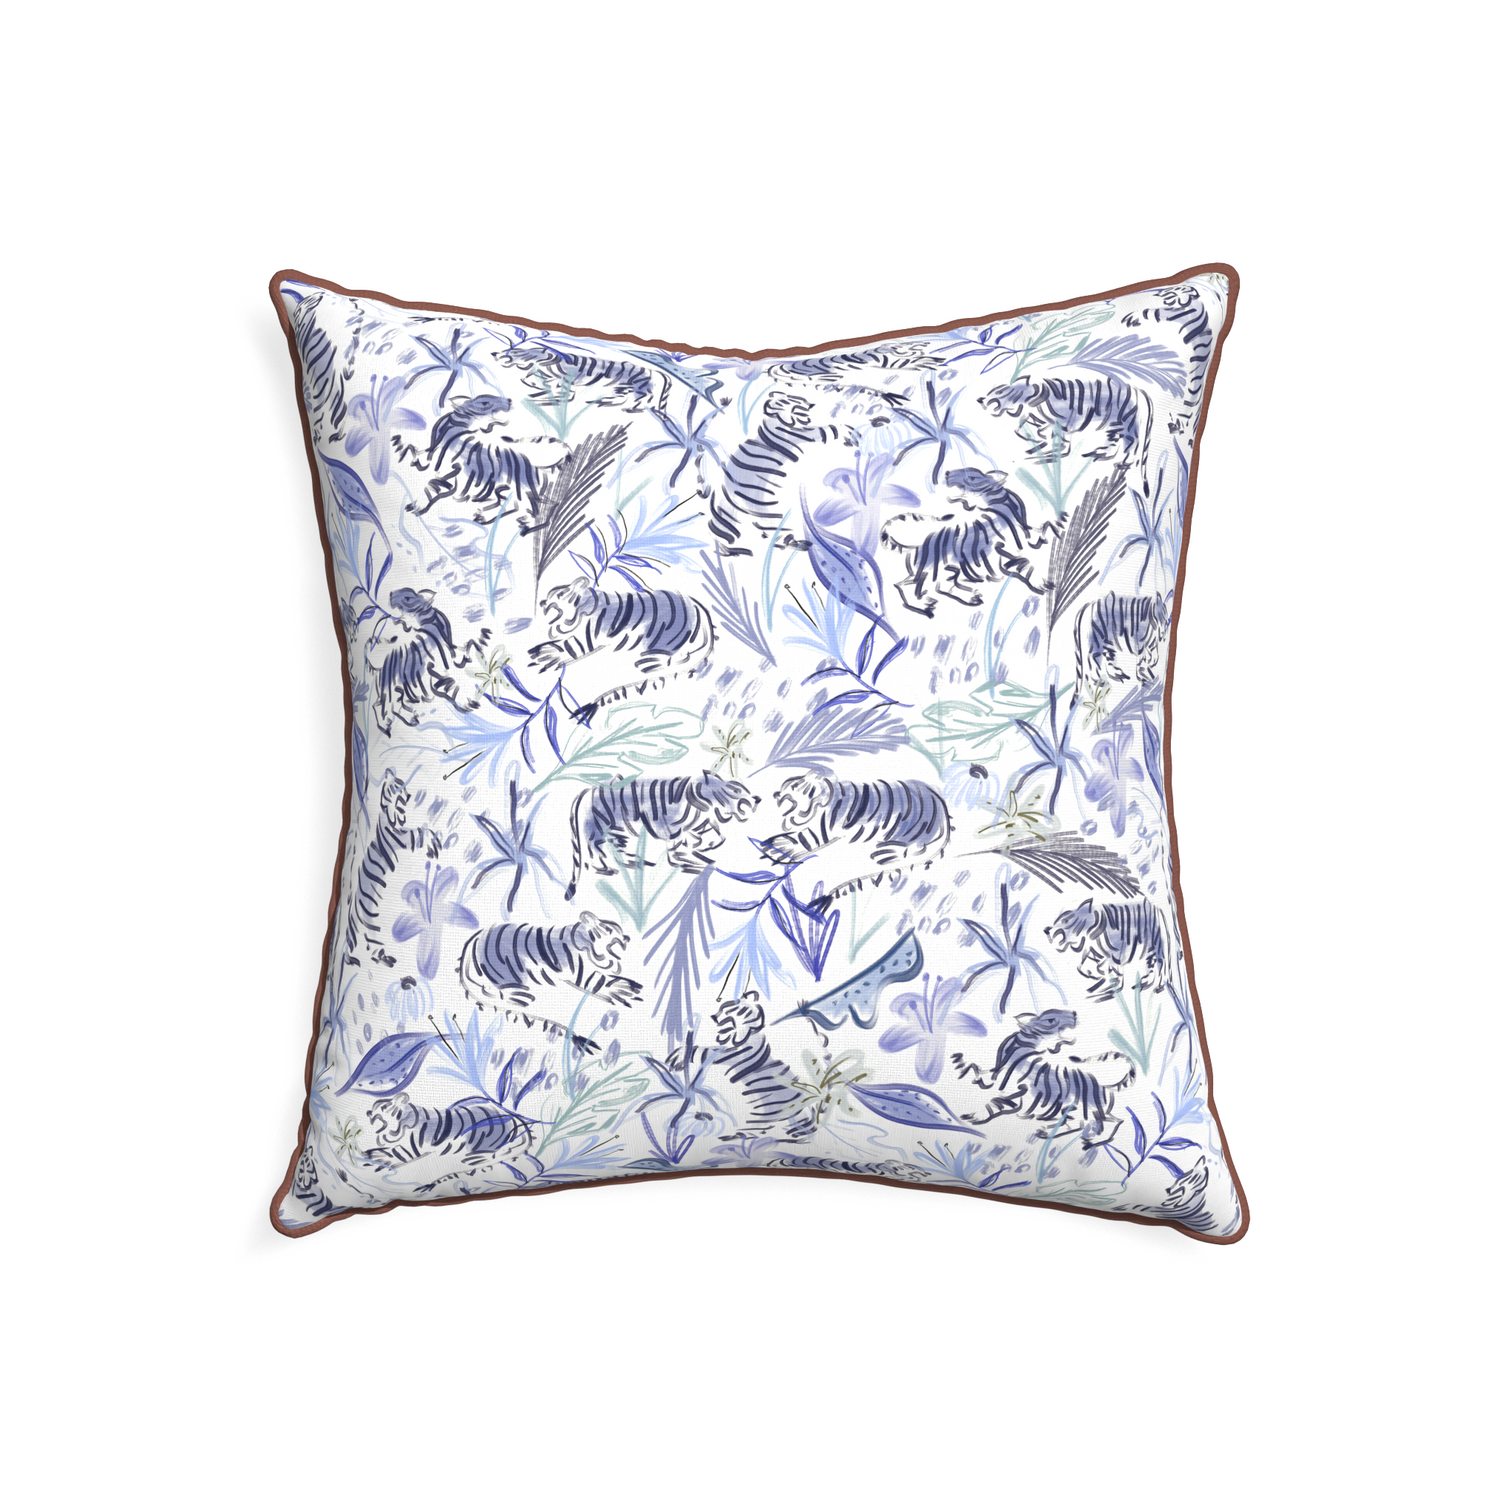 22-square frida blue custom blue with intricate tiger designpillow with w piping on white background